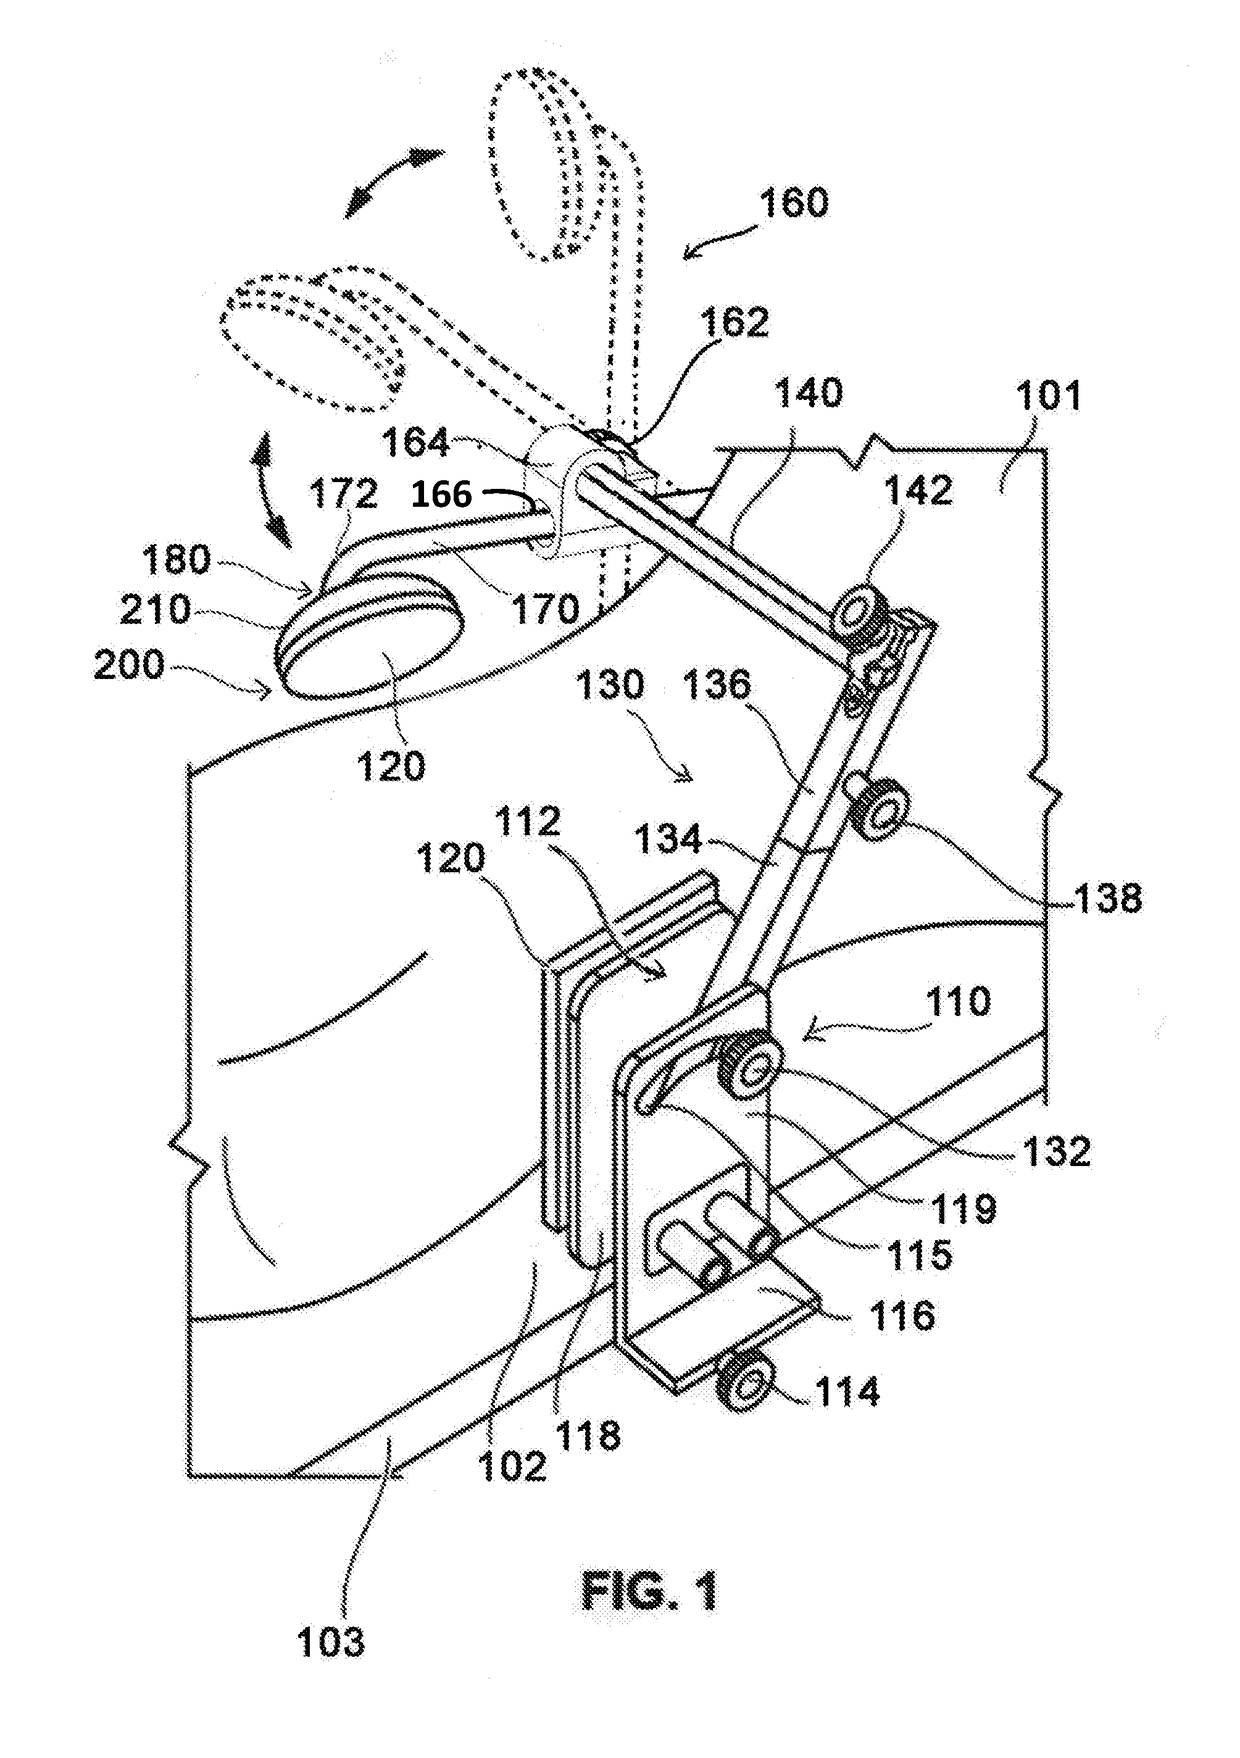 Patient positioning apparatus, system and method with socket connector for positioning patient in lateral position